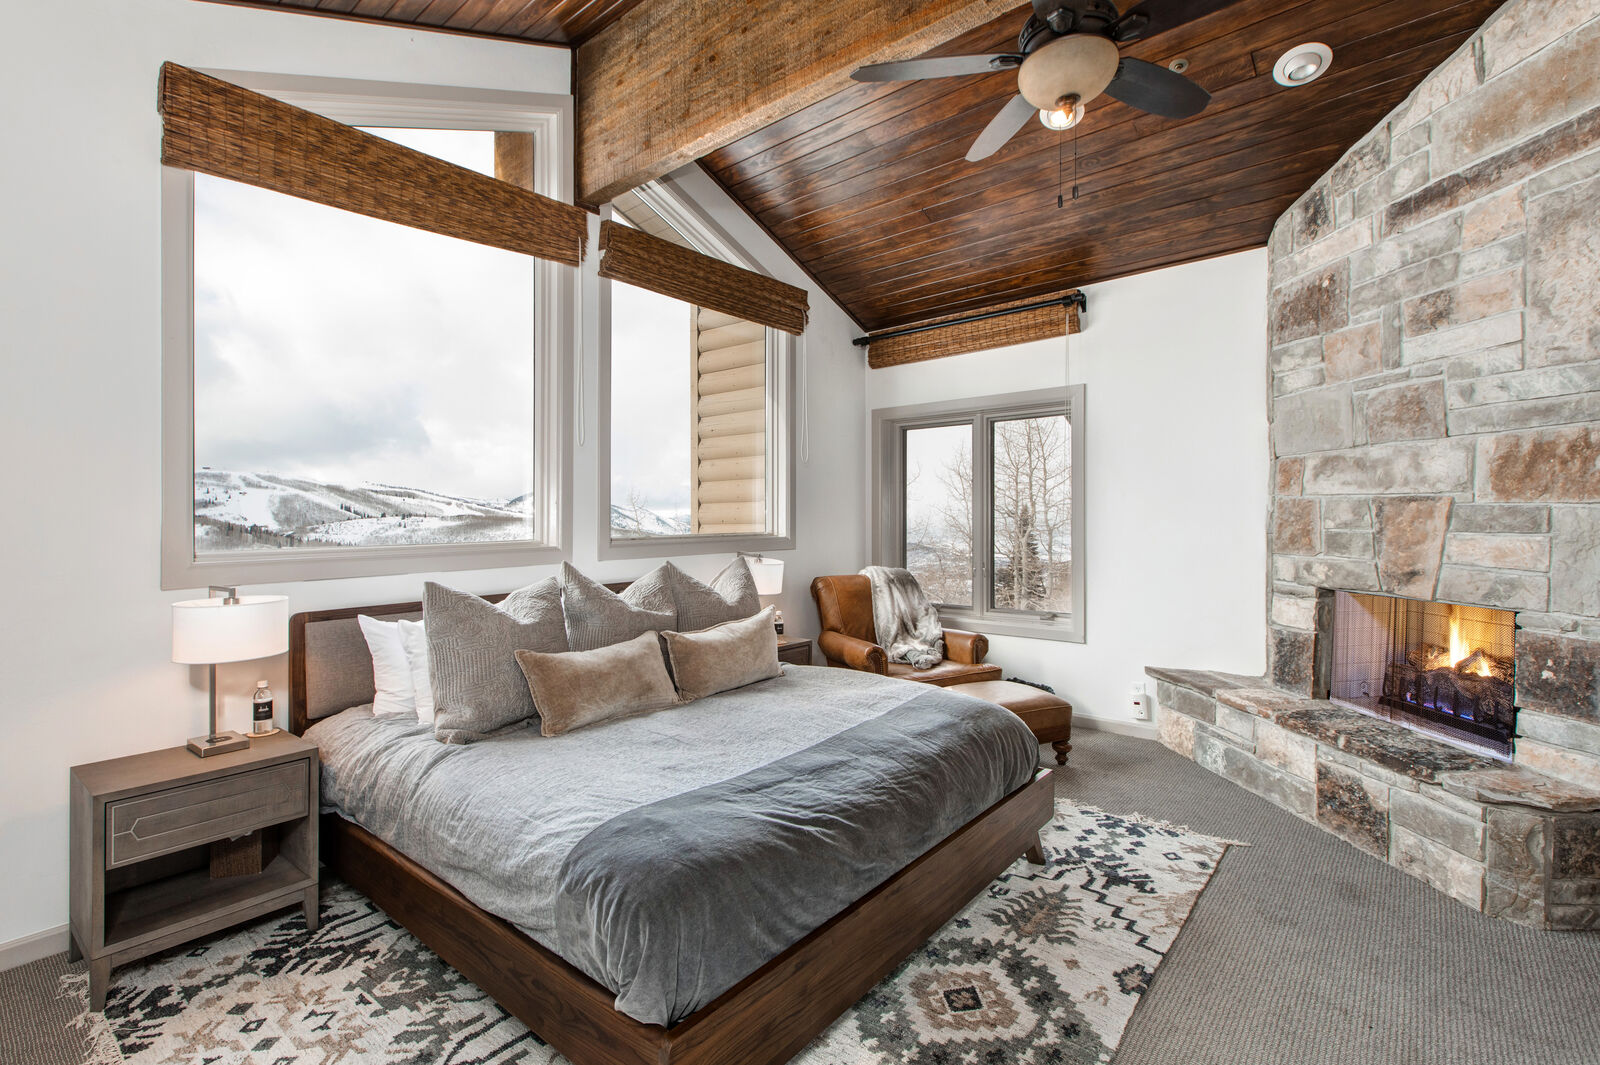 Hospitality brand onefinestay has unveiled a new collection of chalets for the upcoming ski season in Aspen, Colo., Jackson Hole, Wyo., and Park City, Utah.